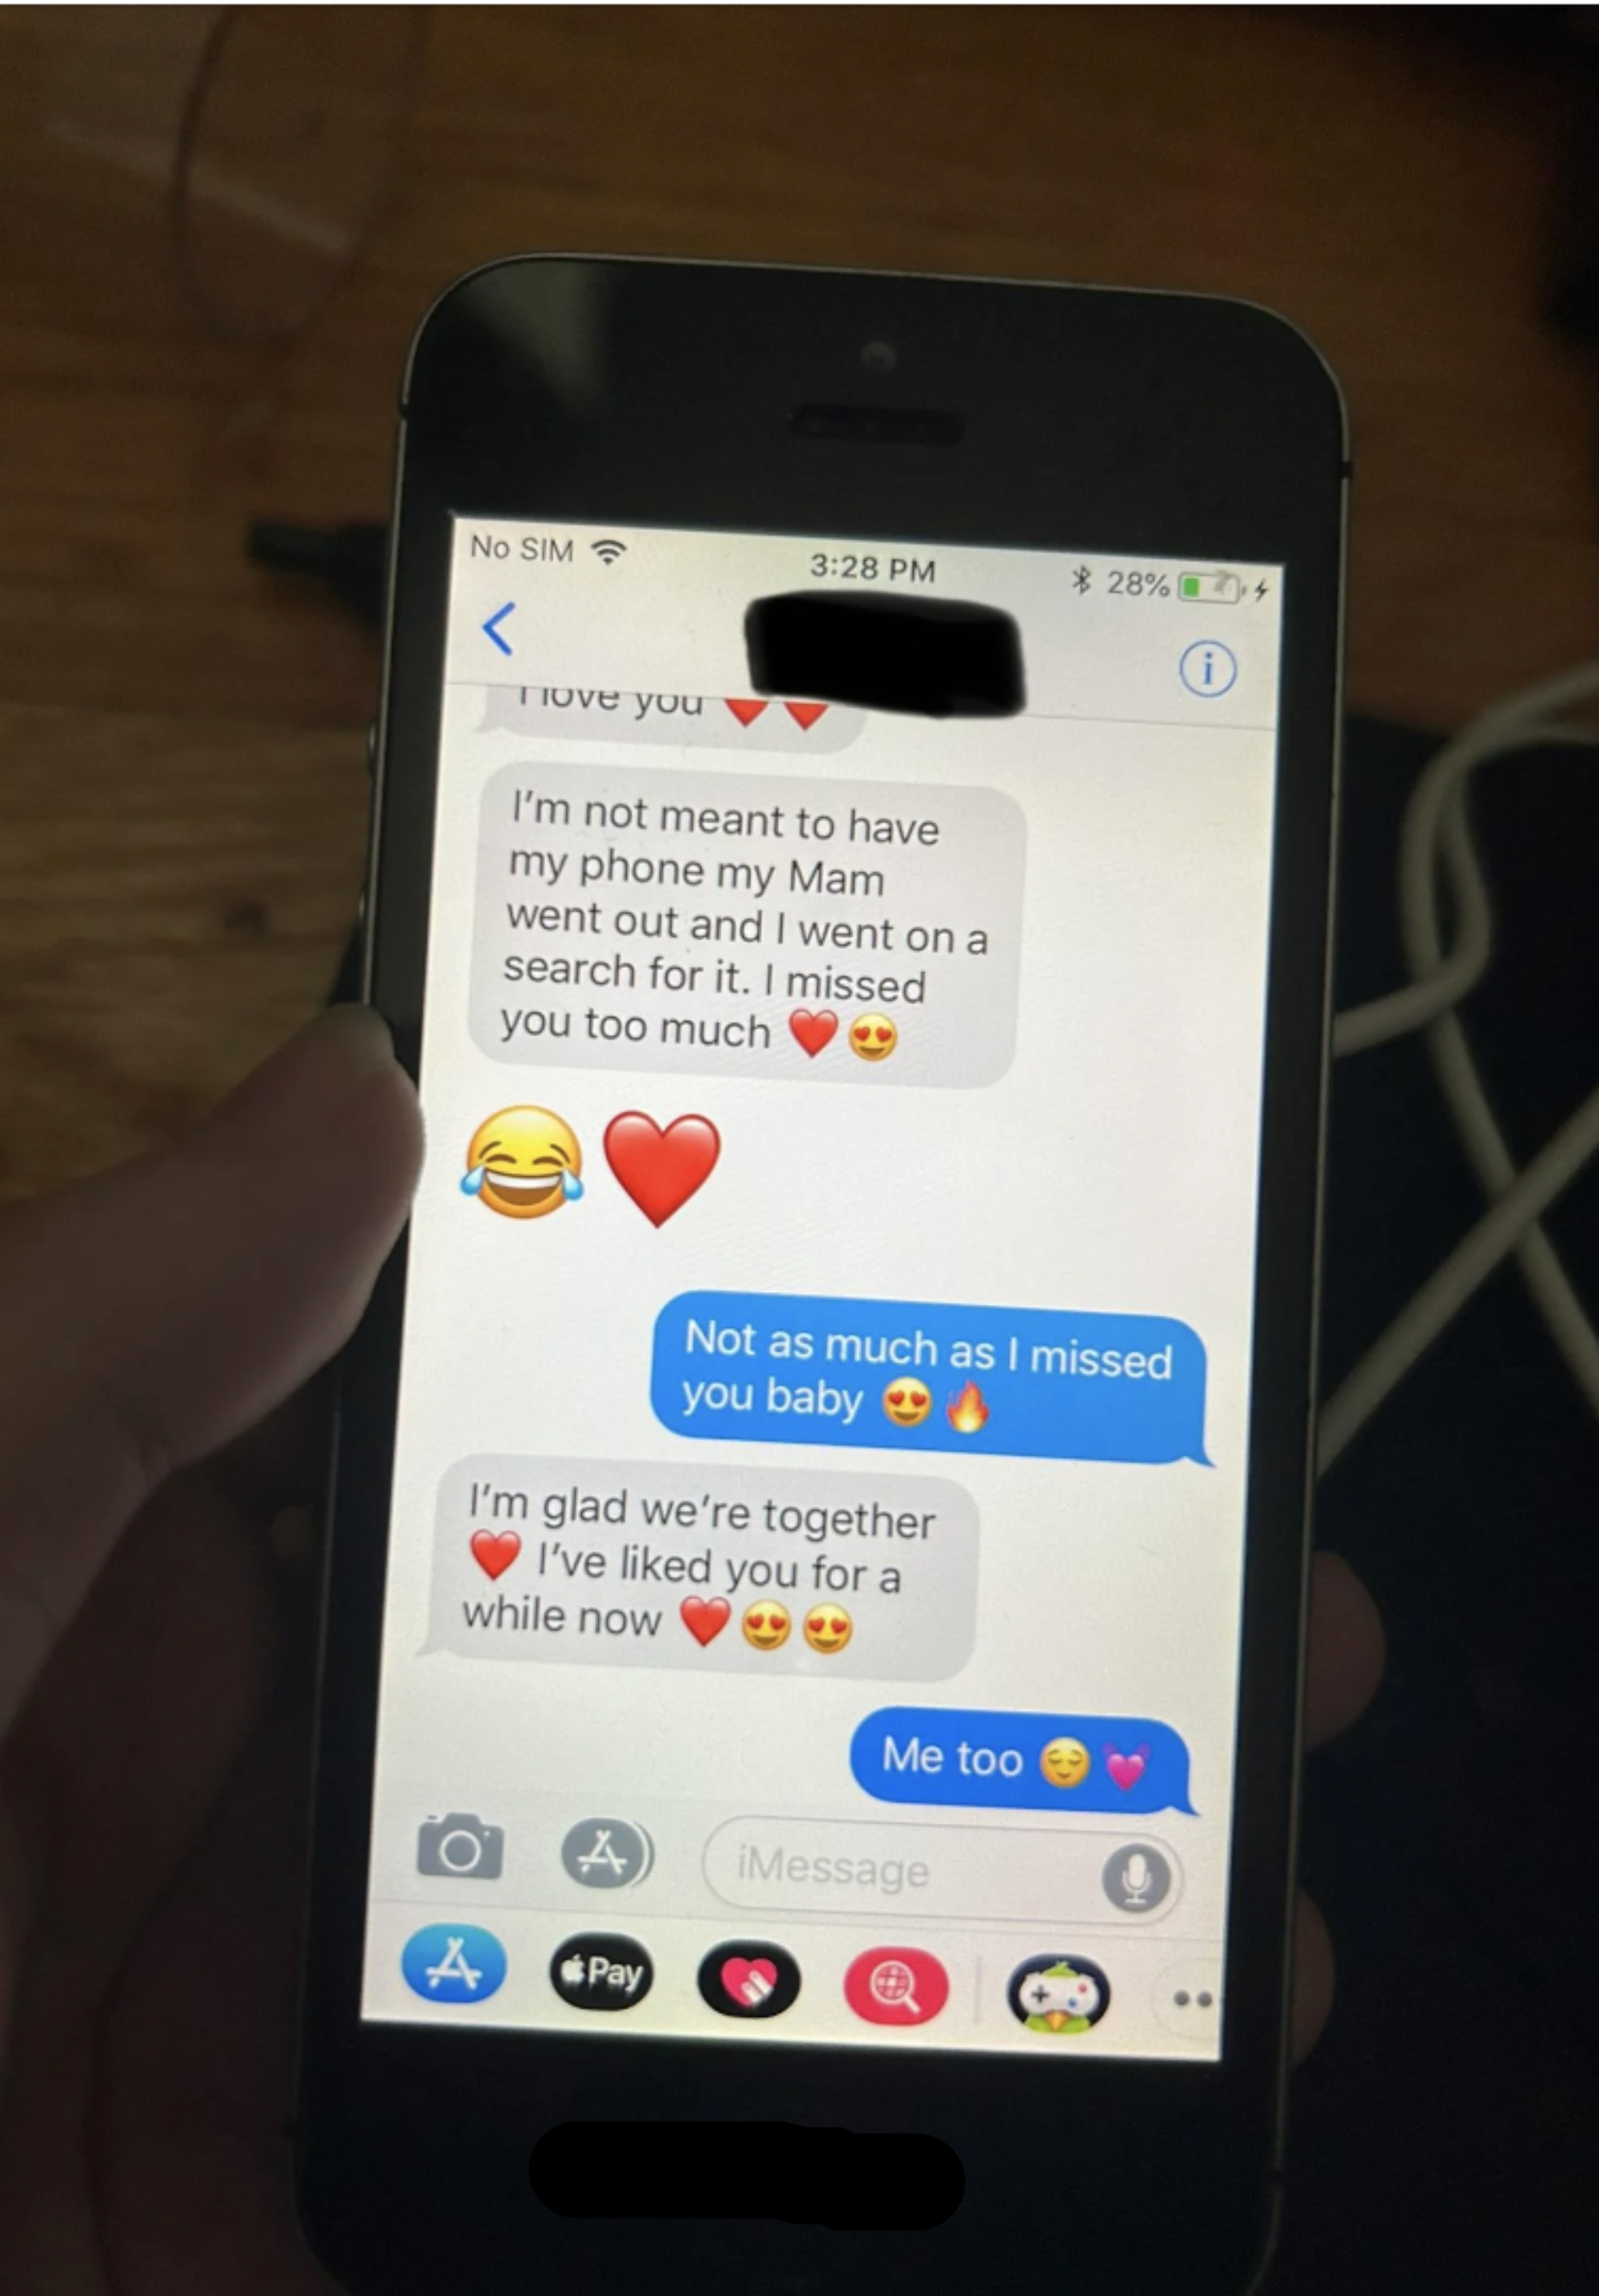 Close-up of a phone screen showing a text conversation about missing each other and expressing affection using emojis